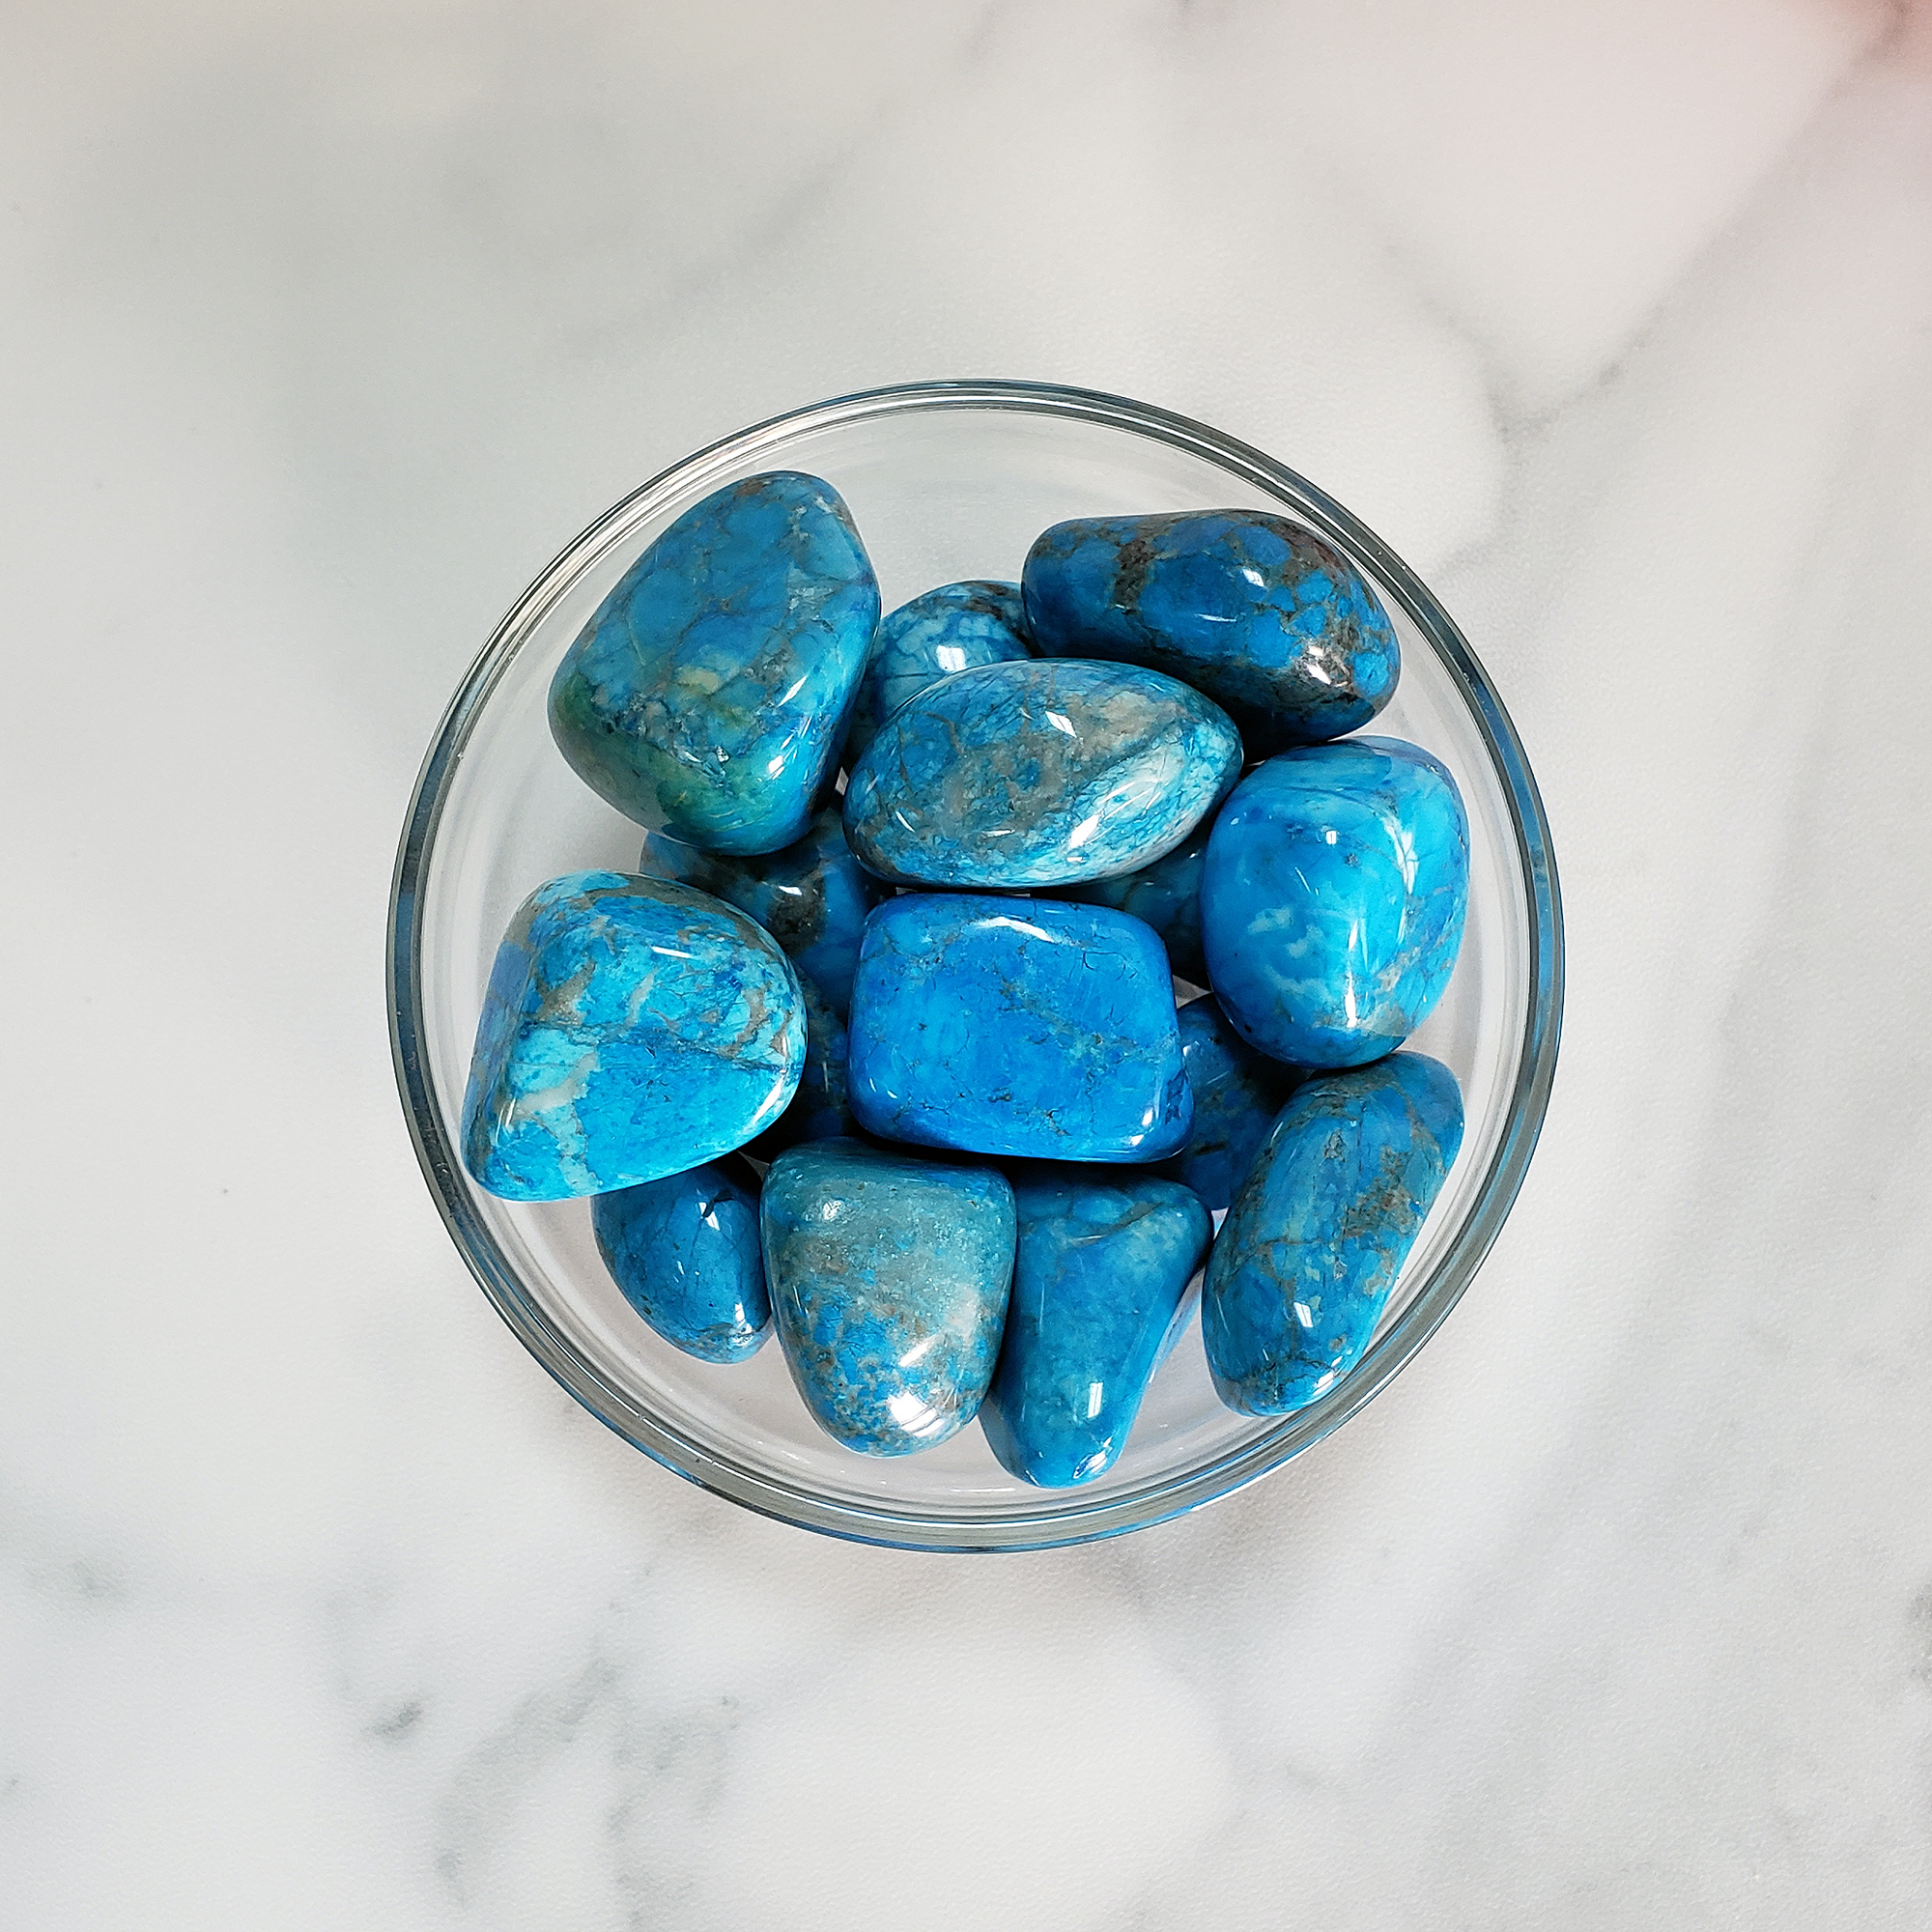 Turquenite Blue Howlite Dyed Tumbled Stone - One Stone - In Glass Bowl from Above